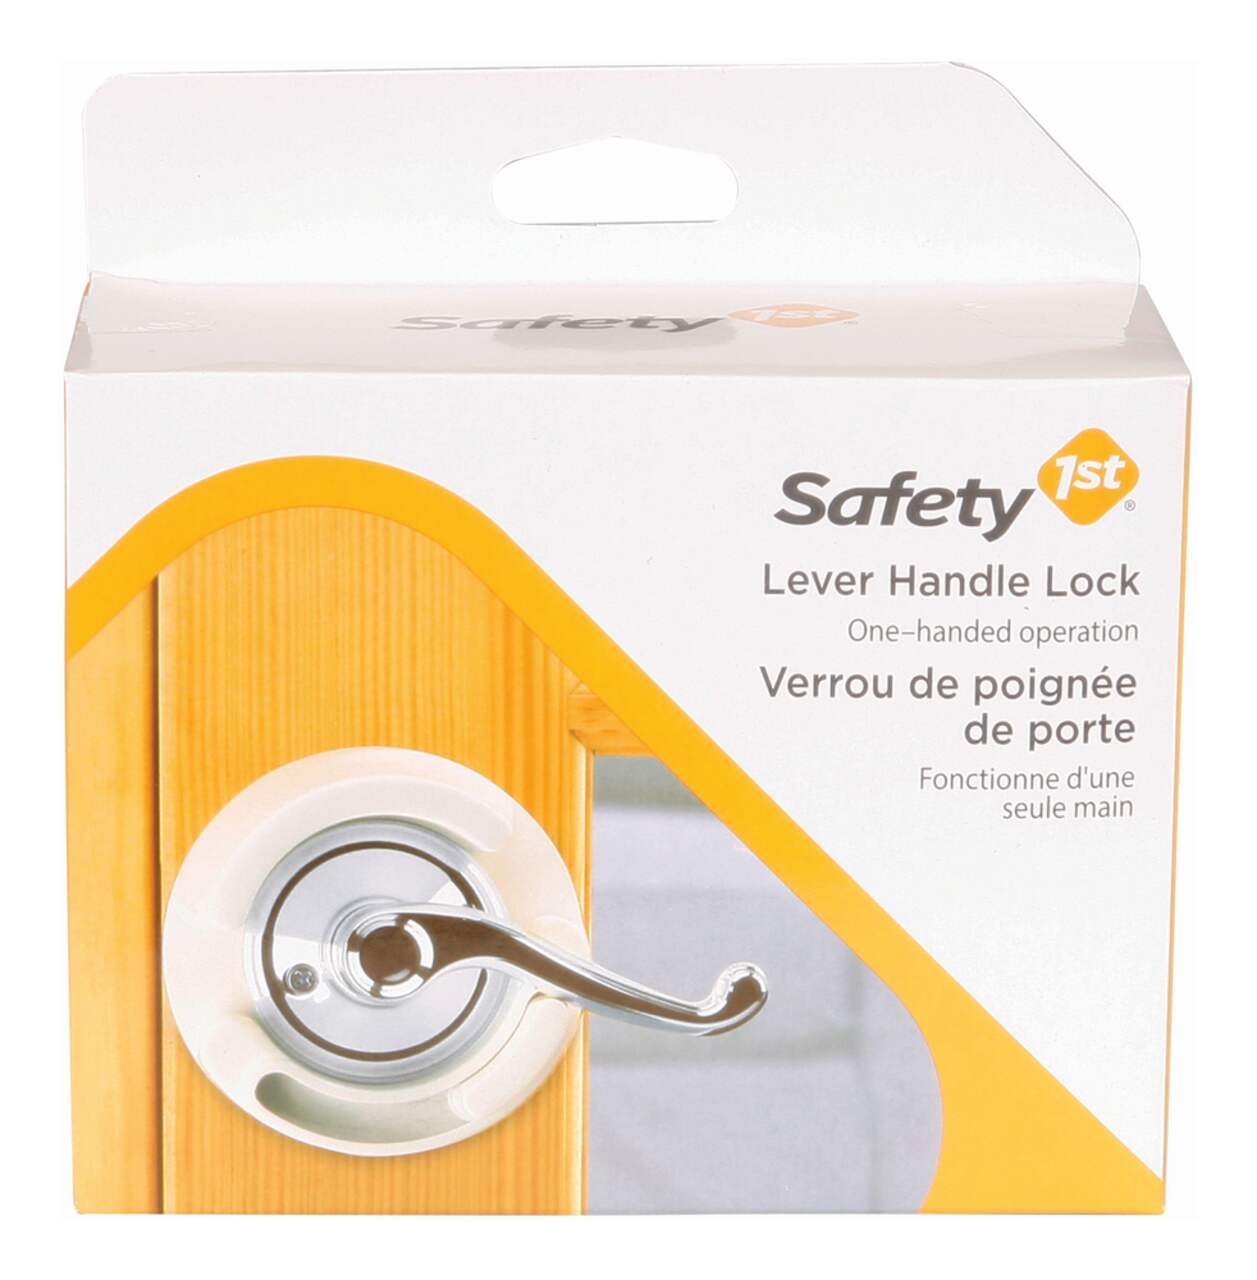 https://media-www.canadiantire.ca/product/automotive/car-care-accessories/child-travel-safety/0462127/lever-handle-lock-a0fa35fc-10a4-4221-bf8f-25ebd64ed646.png?imdensity=1&imwidth=640&impolicy=mZoom